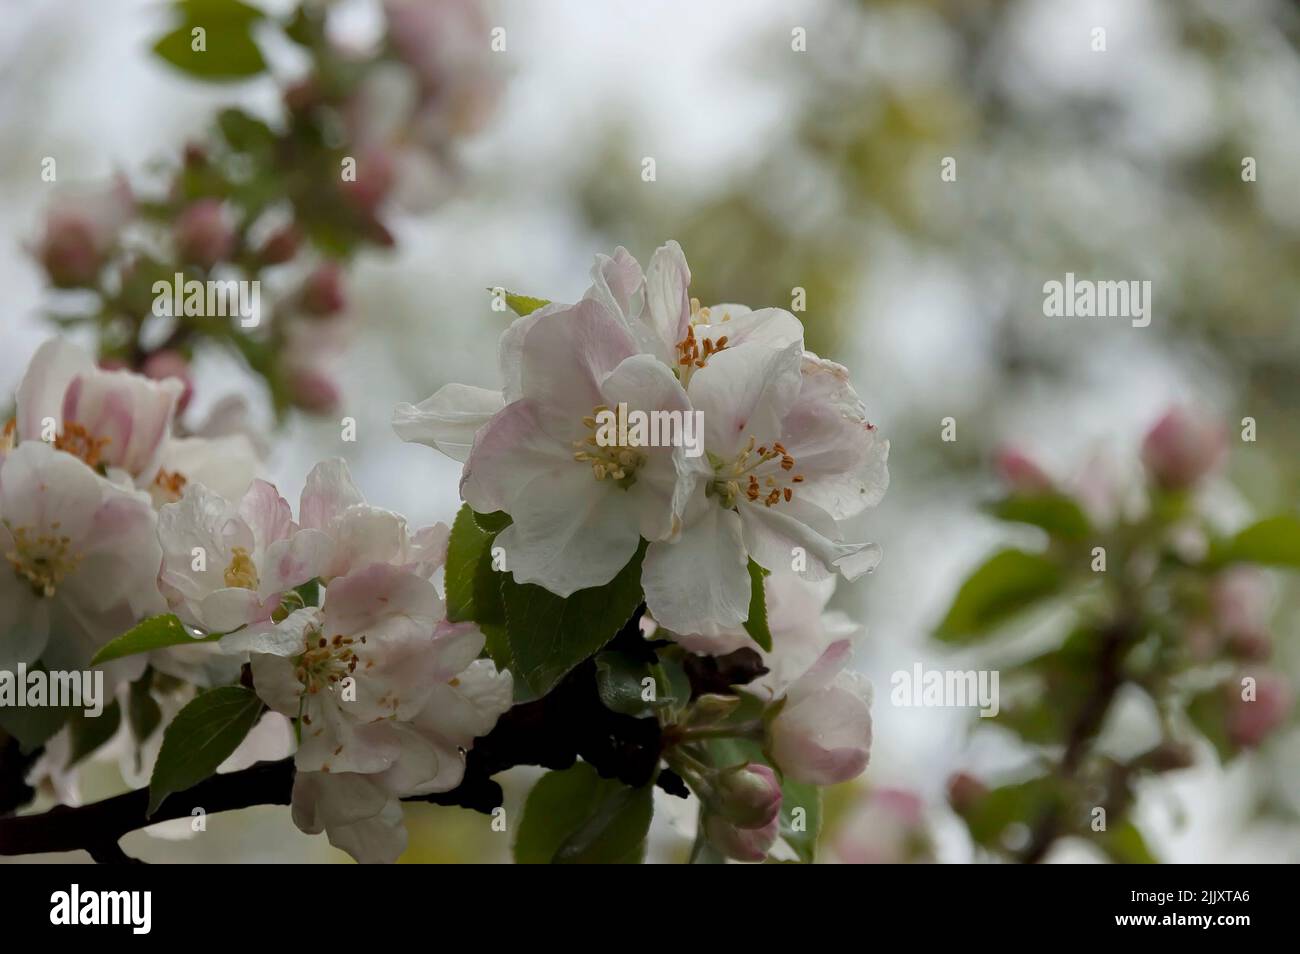 Photo with a scene of a blossoming apple tree, Sofia, Bulgaria Stock Photo